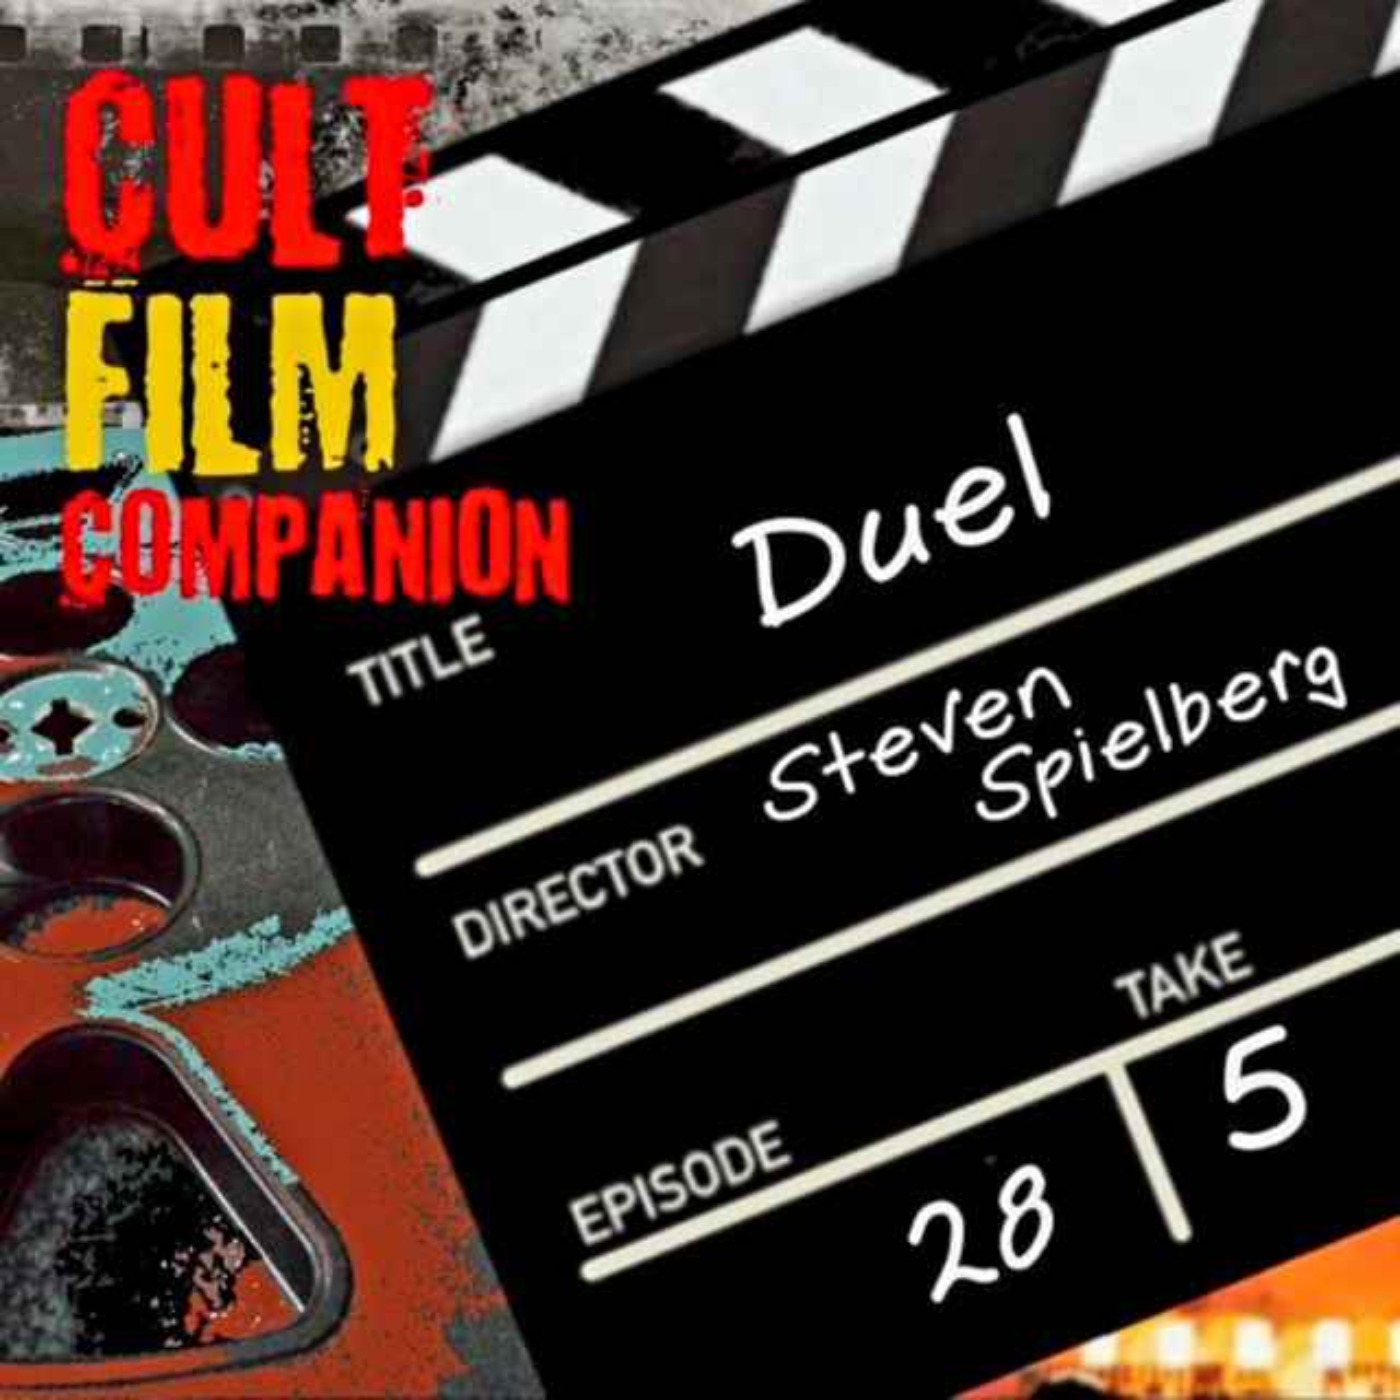 Ep. 28 Duel directed by Steven Spielberg